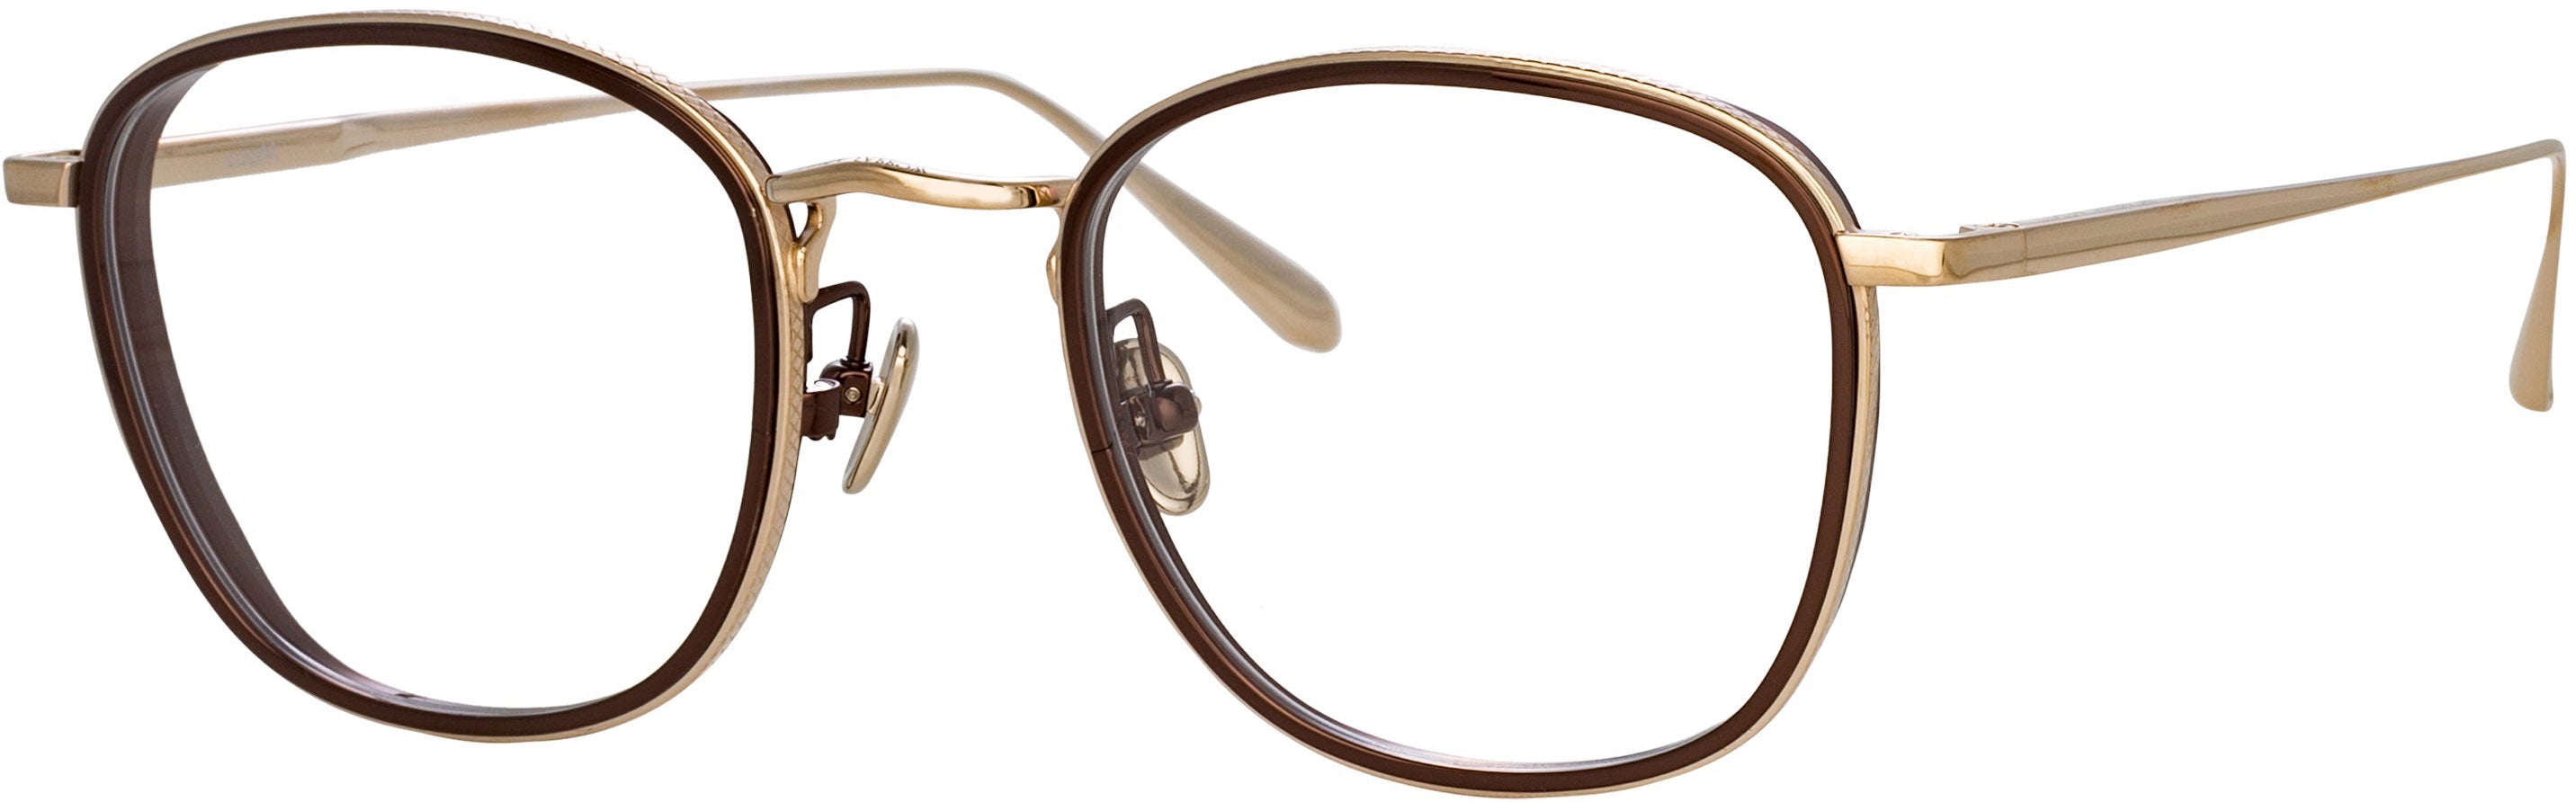 Color_LFL1220C3OPT - Maco Squared Optical Frame in Light Gold